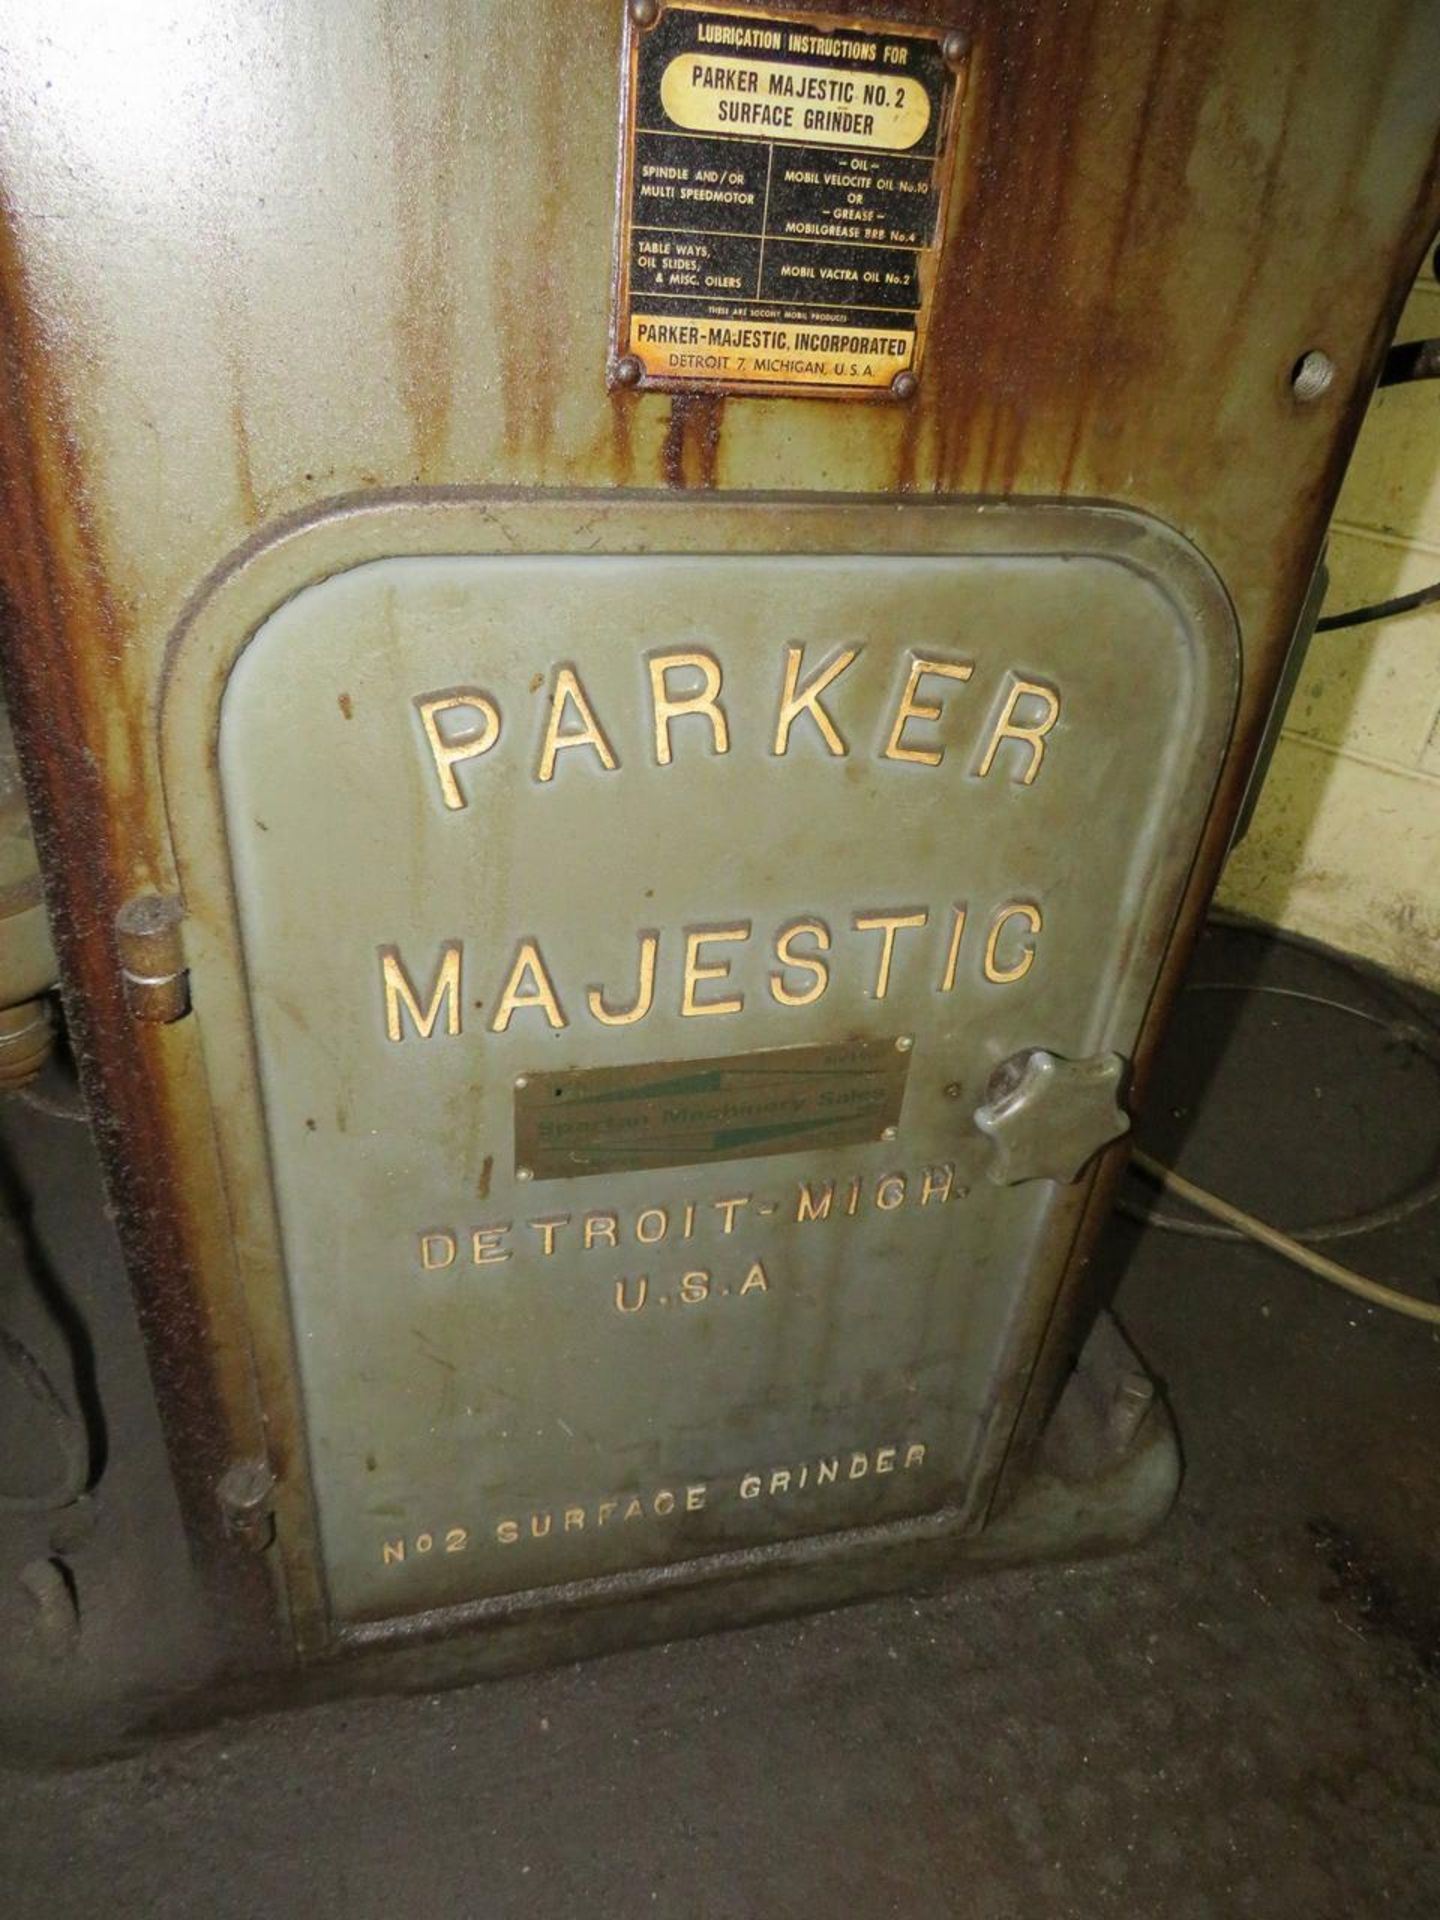 1957 PARKER MAJESTIC #2 6" x 18" HYDRAULIC SURFACE GRINDER - Image 3 of 6